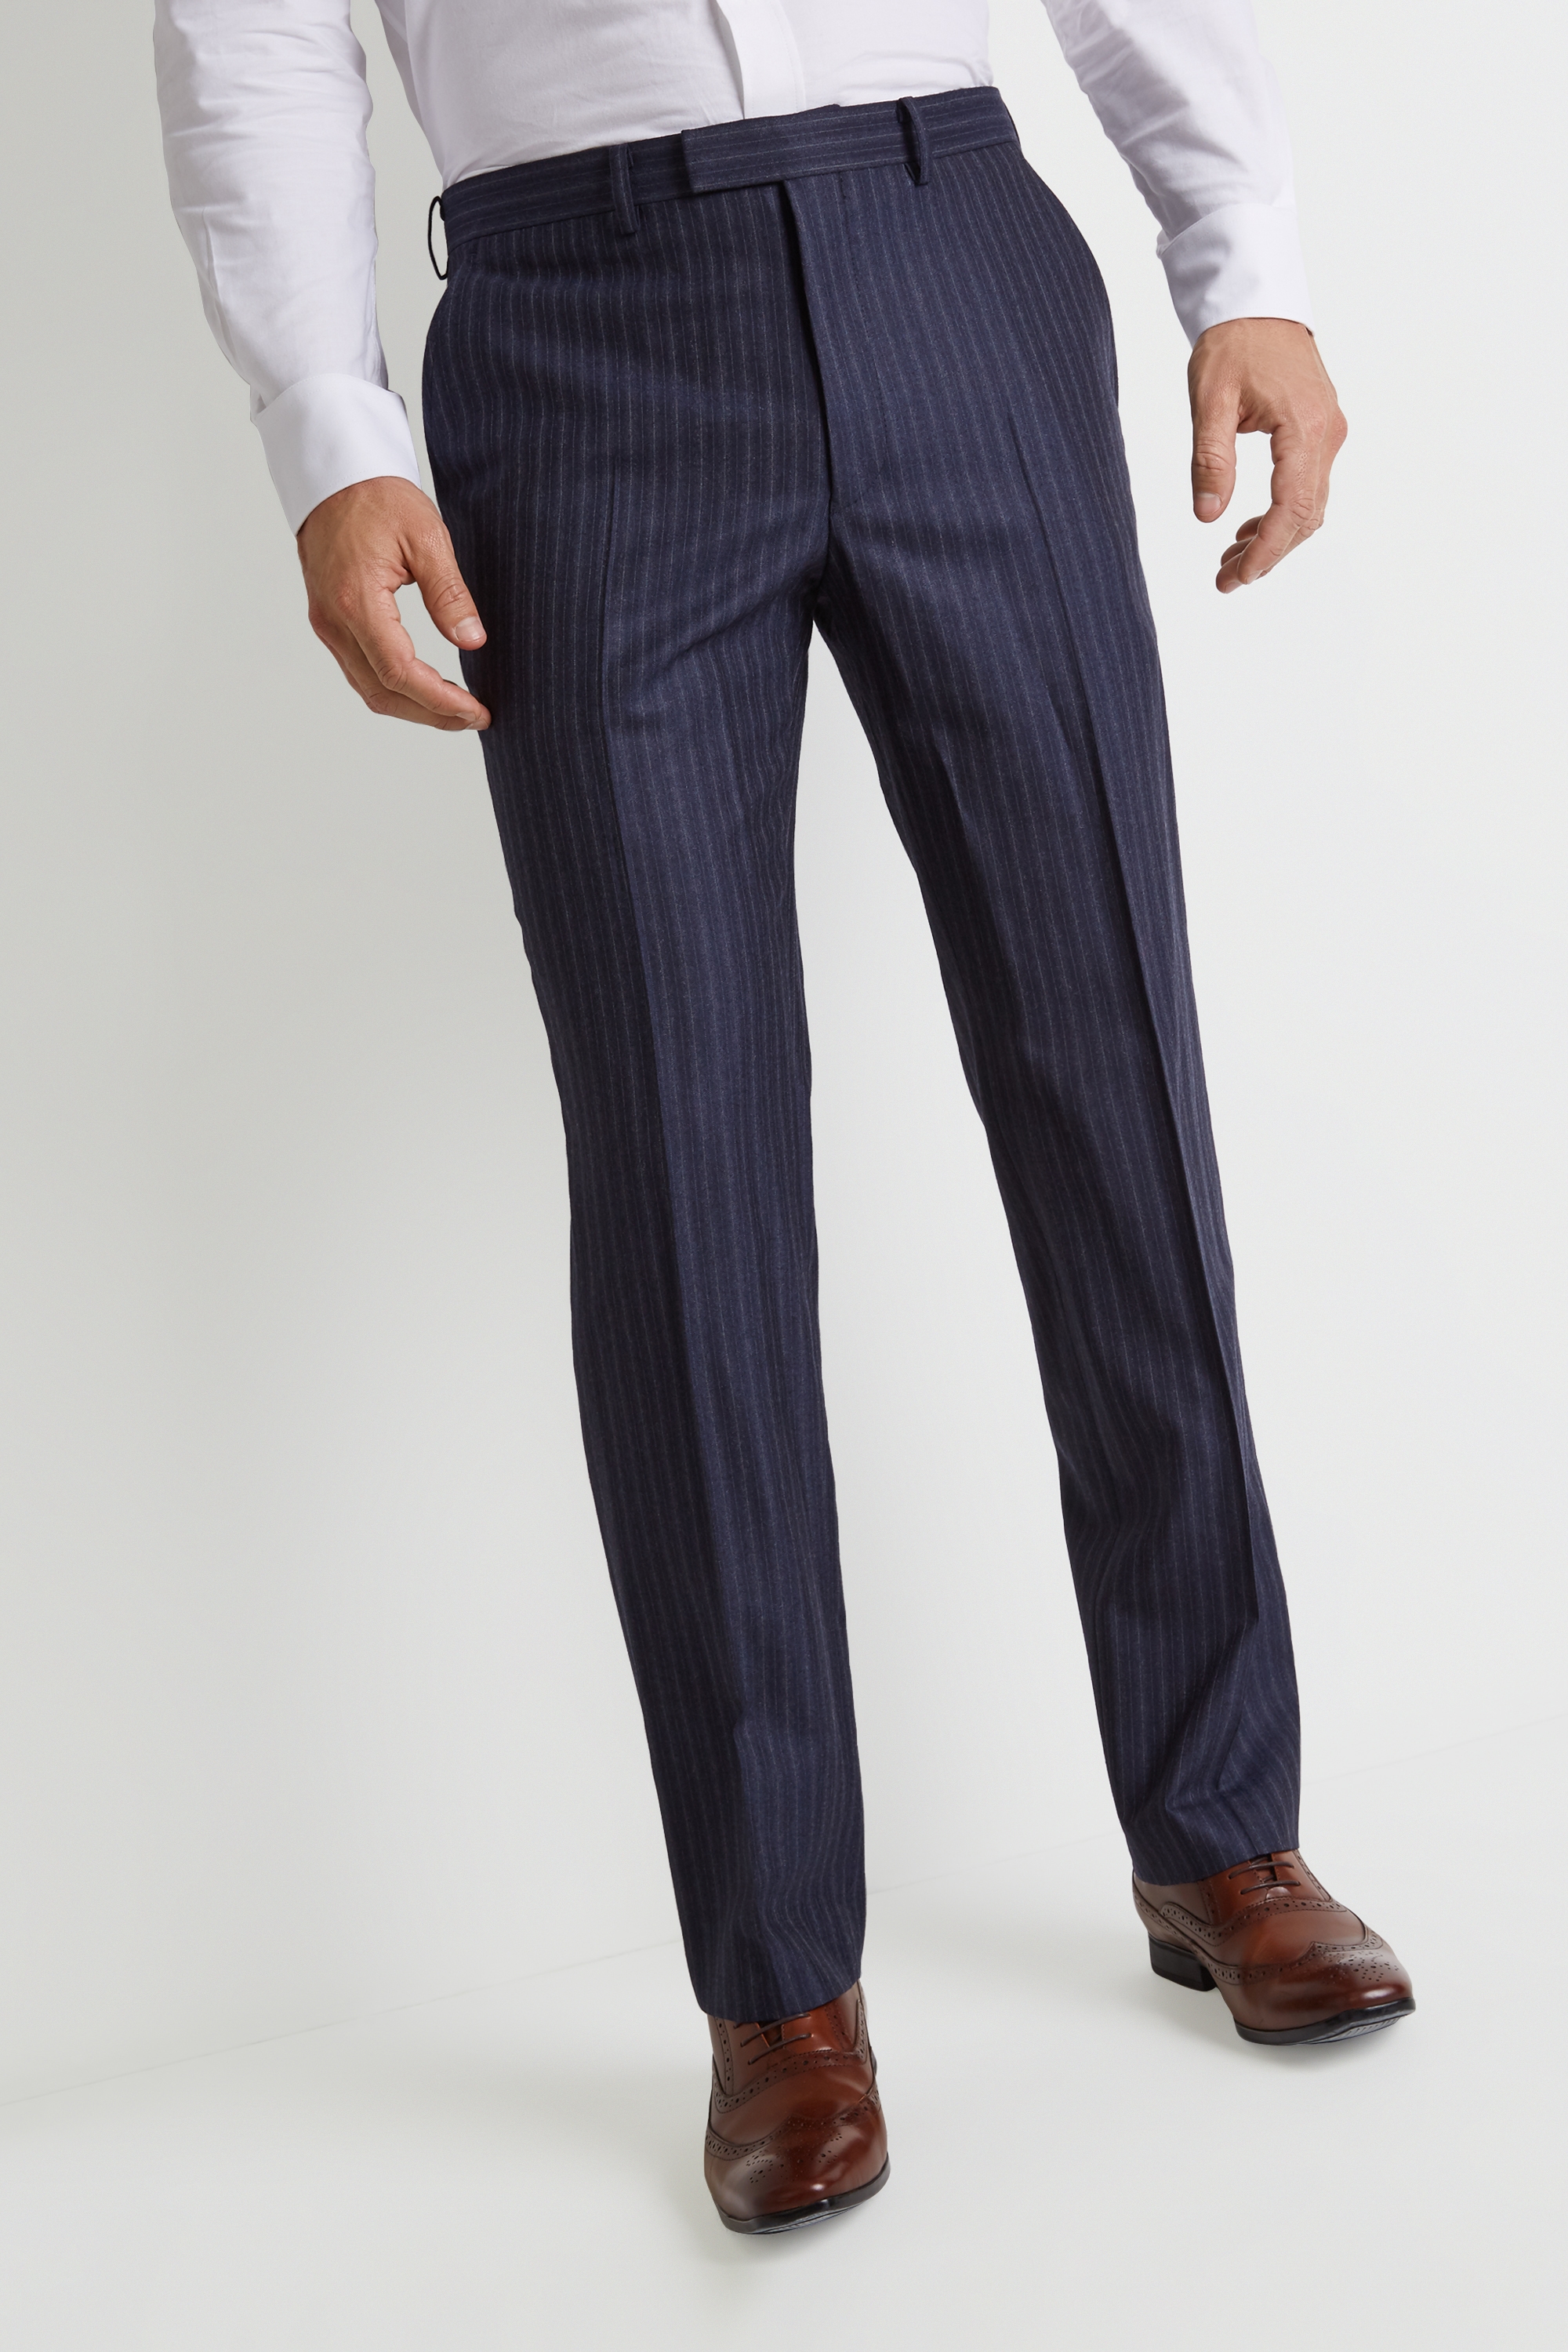 Savoy Taylors Guild Regular Fit Navy Double Stripe Trousers